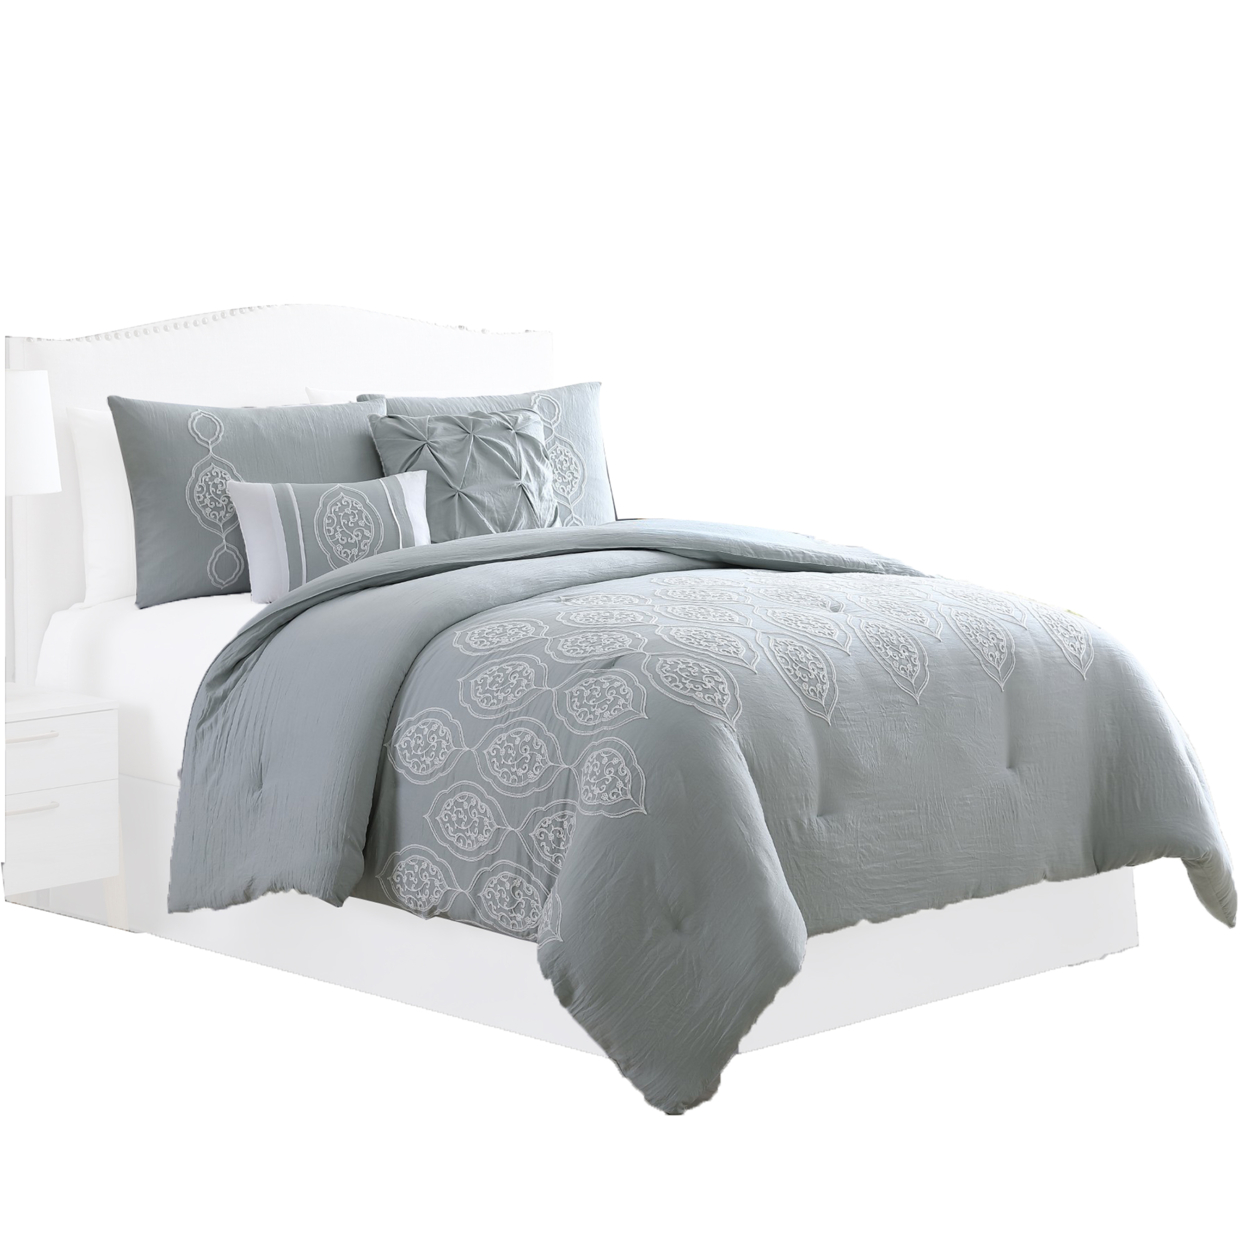 Ohio 5 Piece Queen Comforter Set With Scrolled Motifs, Gray And White By The Urban Port- Saltoro Sherpi